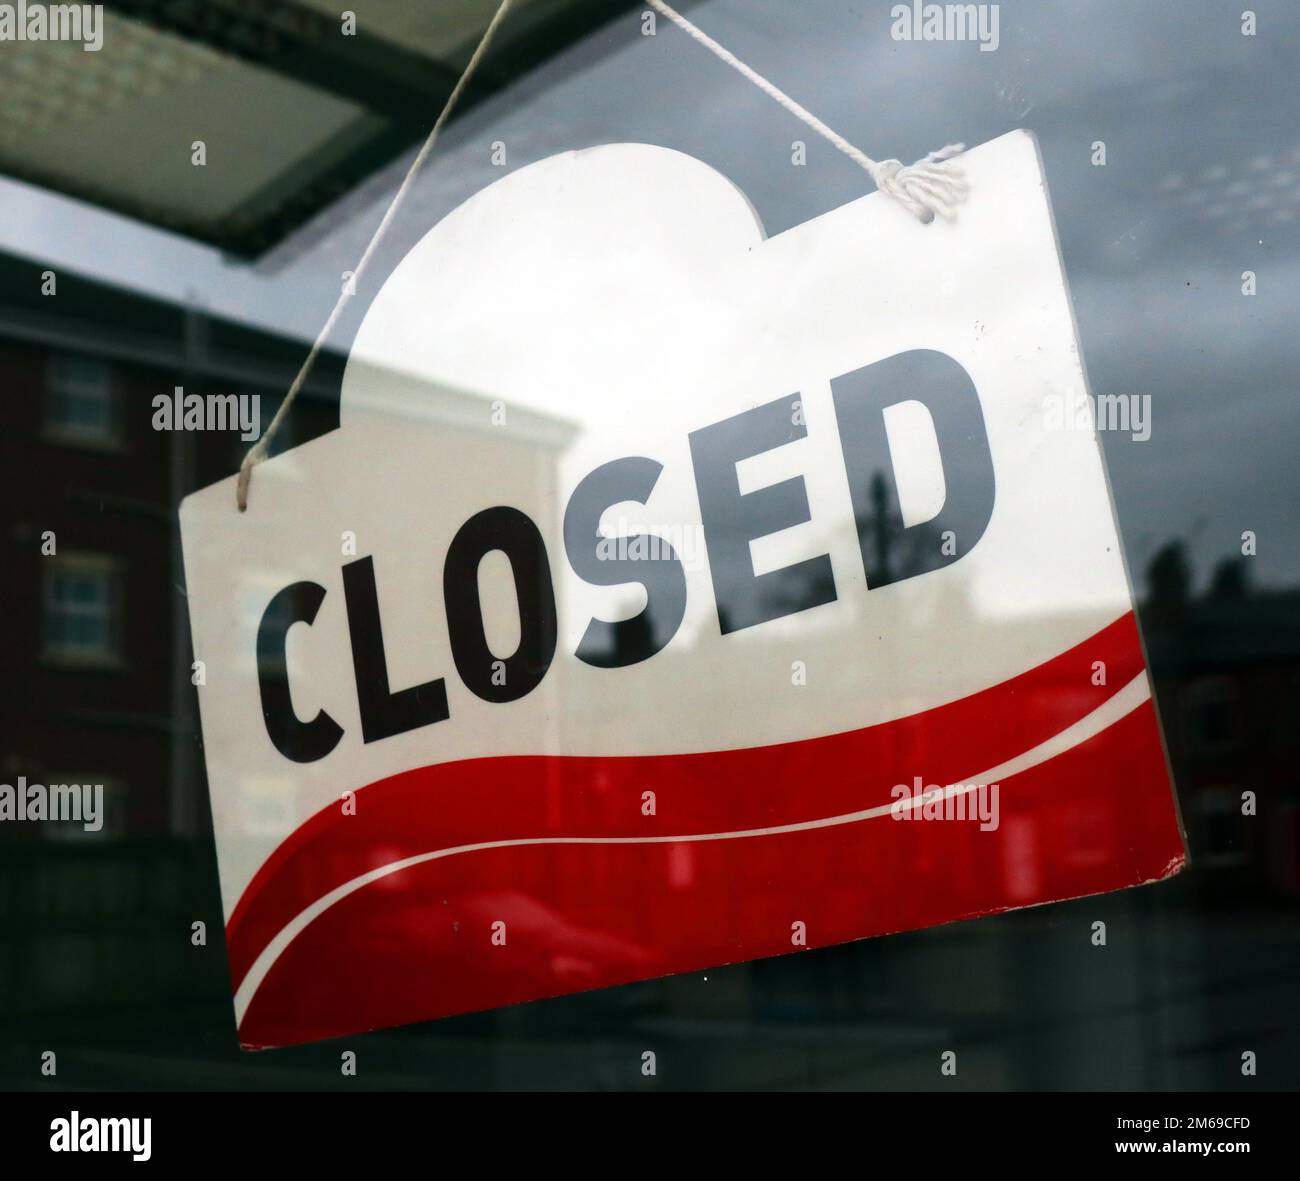 Red & white, Closed sign, in a shop doorway Stock Photo